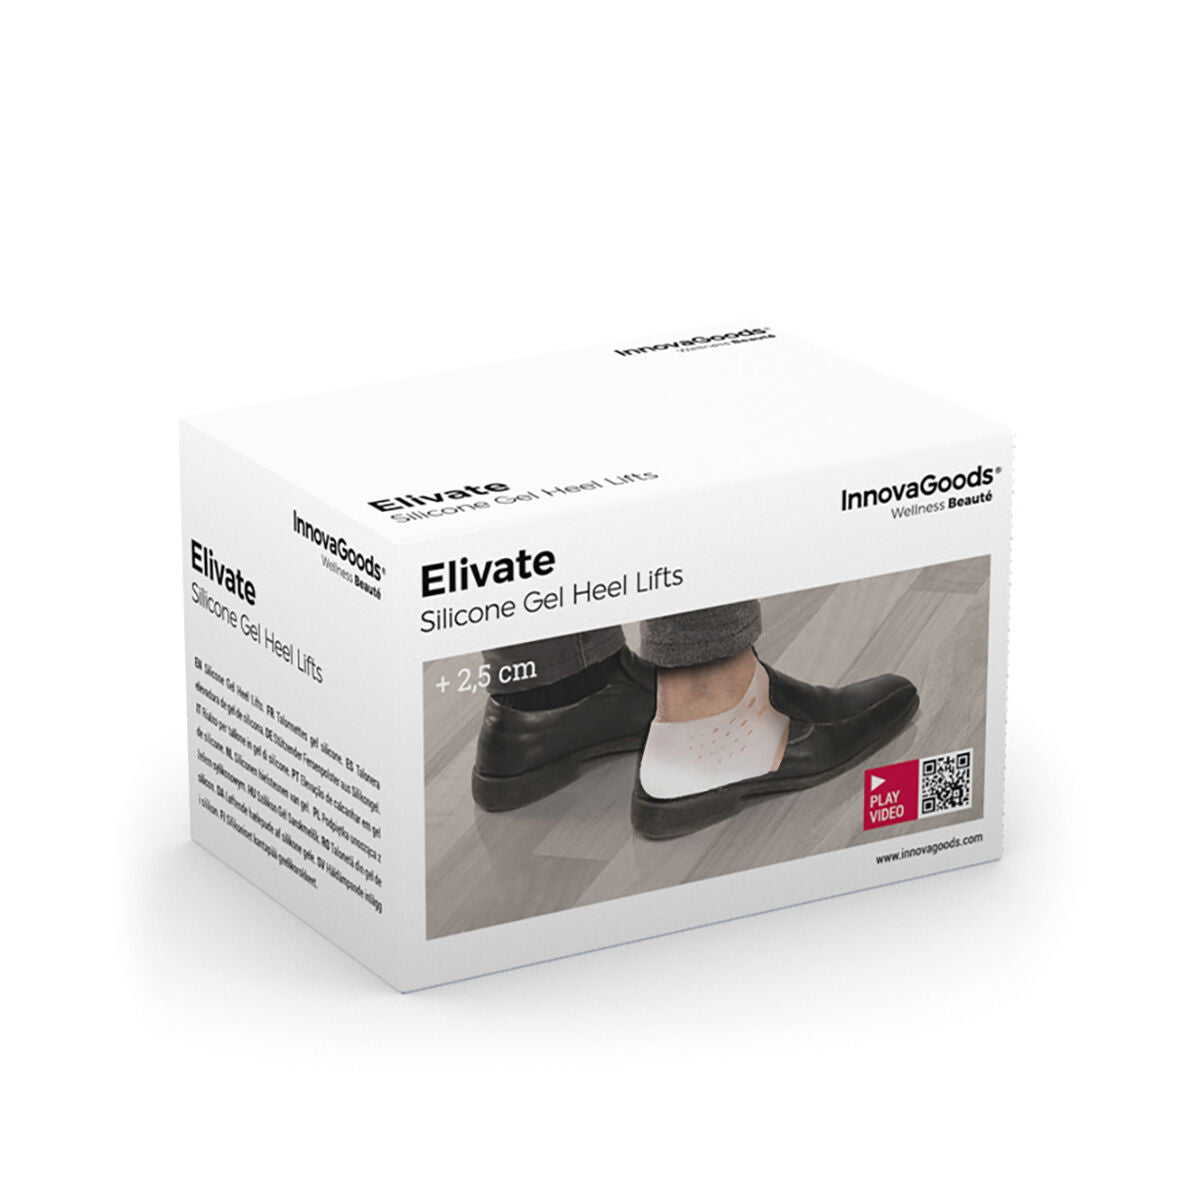 Silicone Gel Heel Lift Insols Elivate Innovagoods